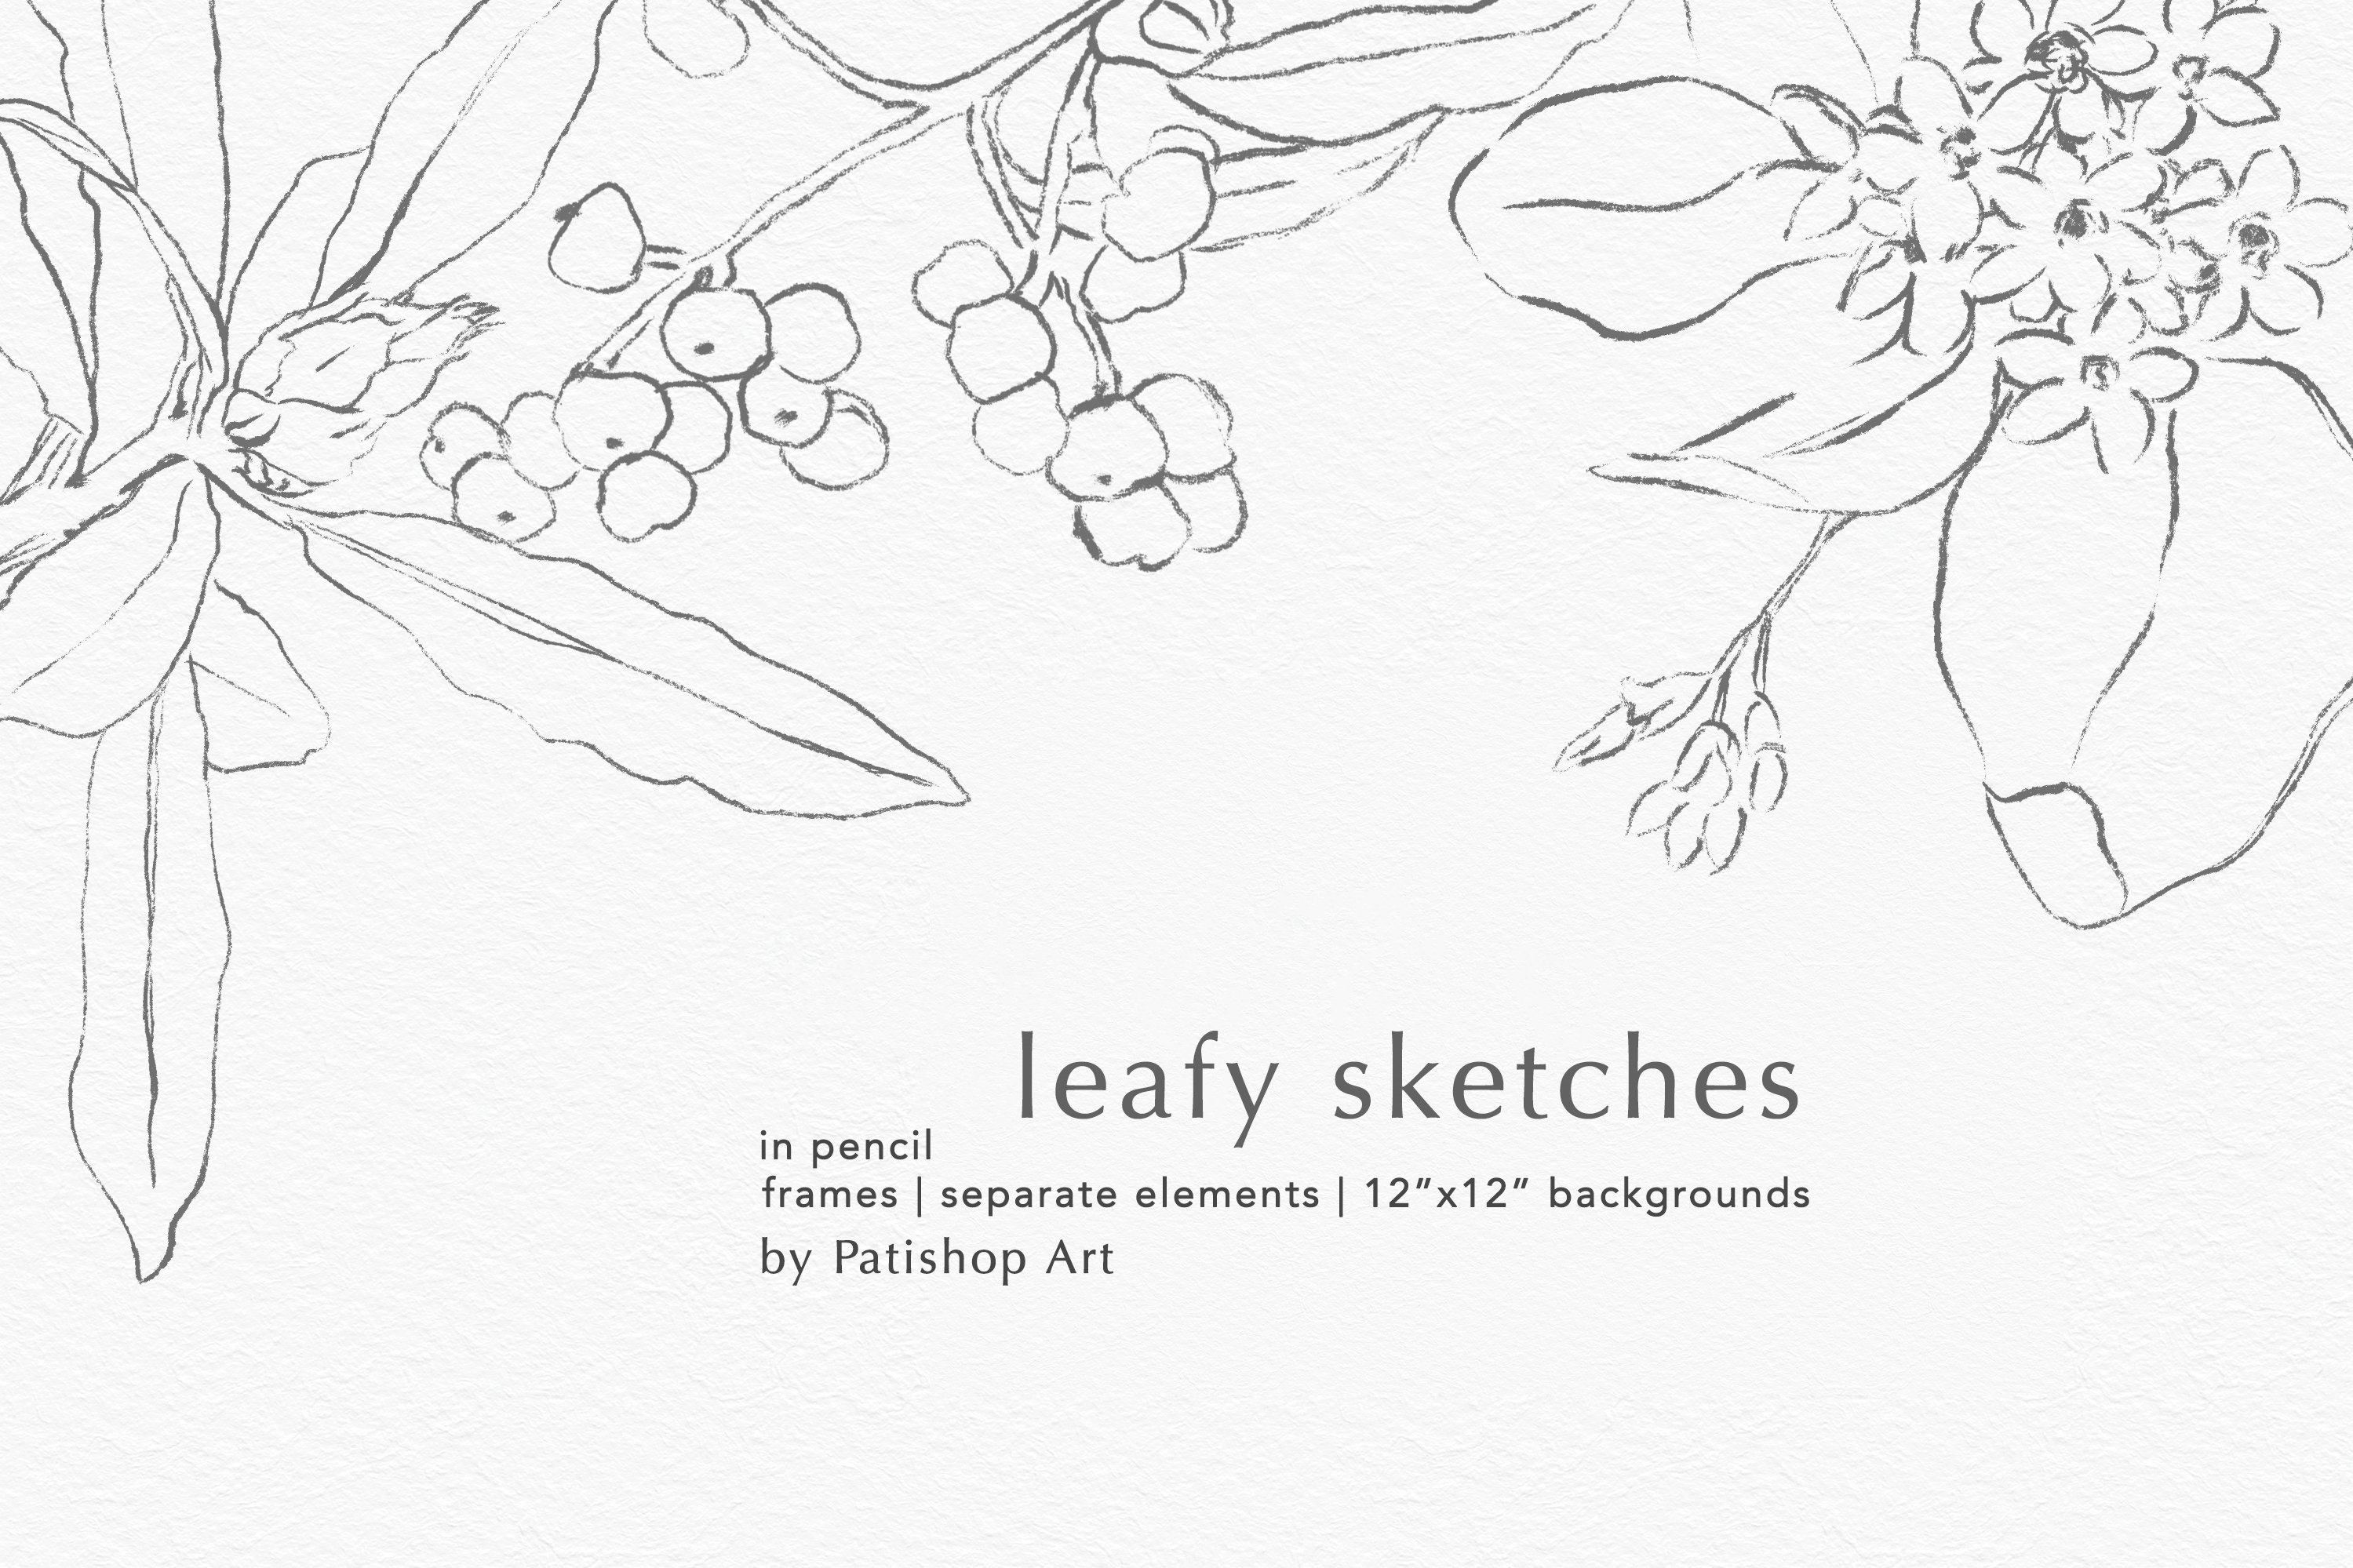 Leafy Sketches in Pencil preview image.